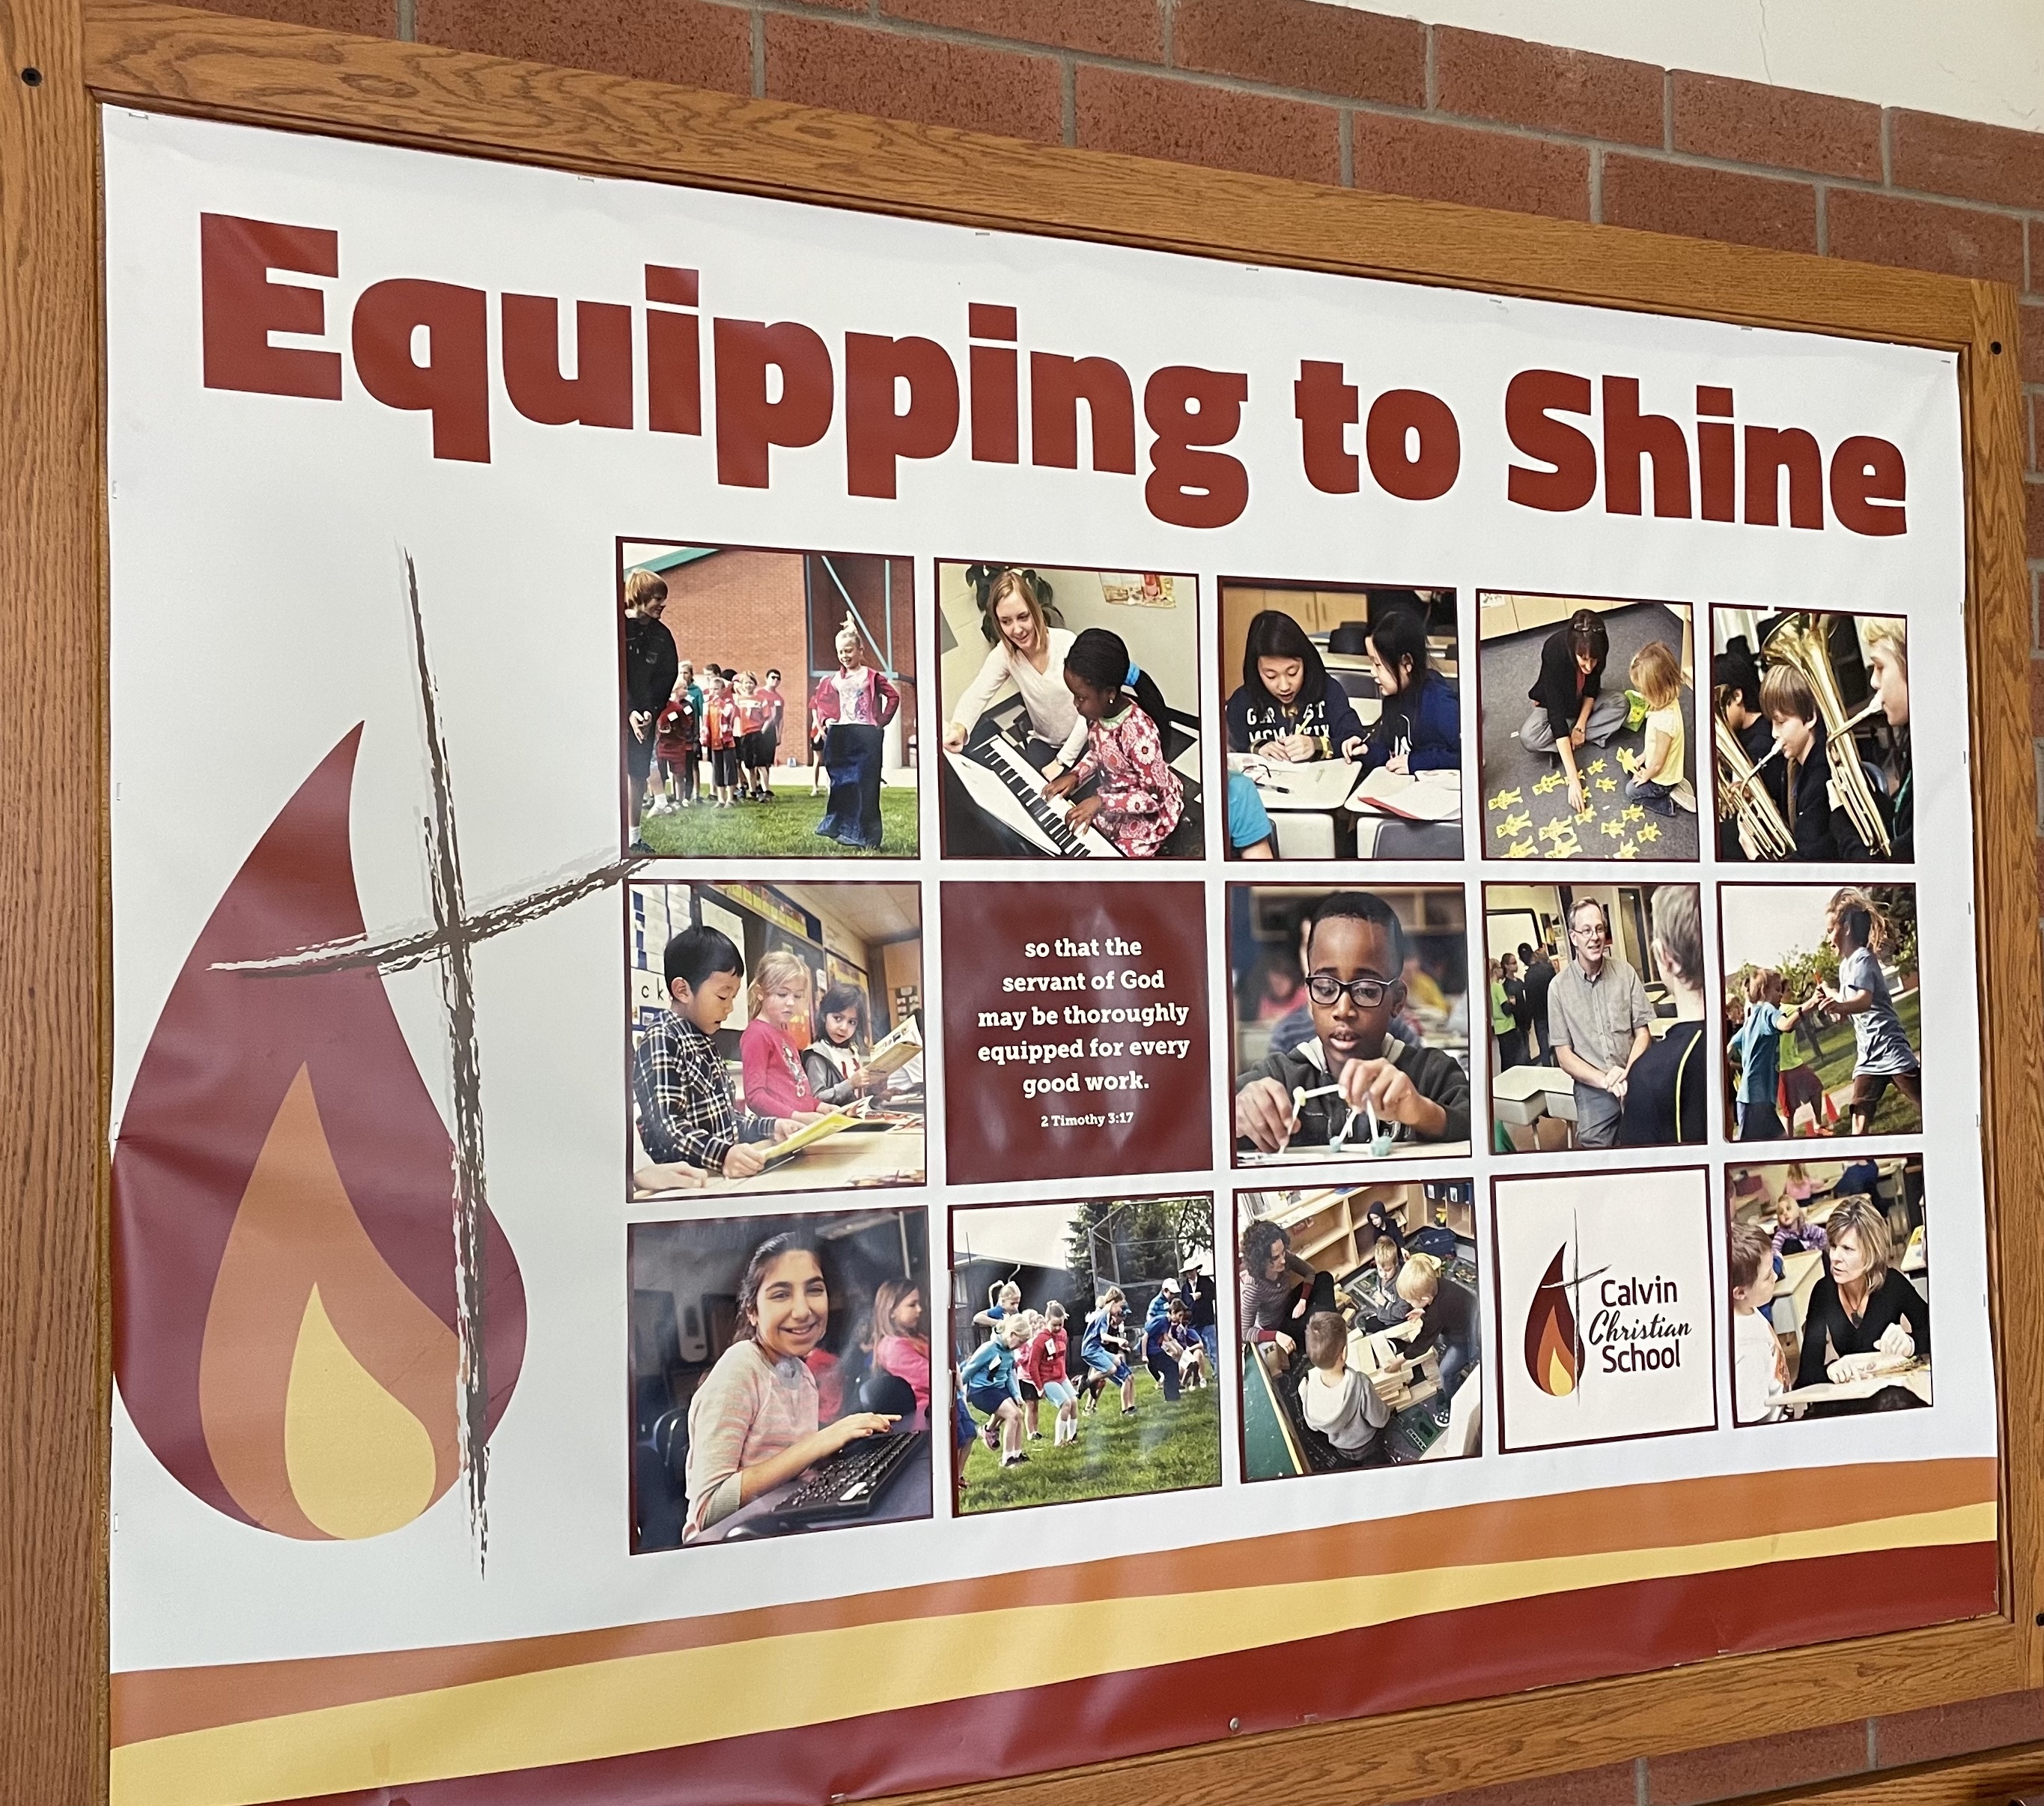 Equipping to shine tag line